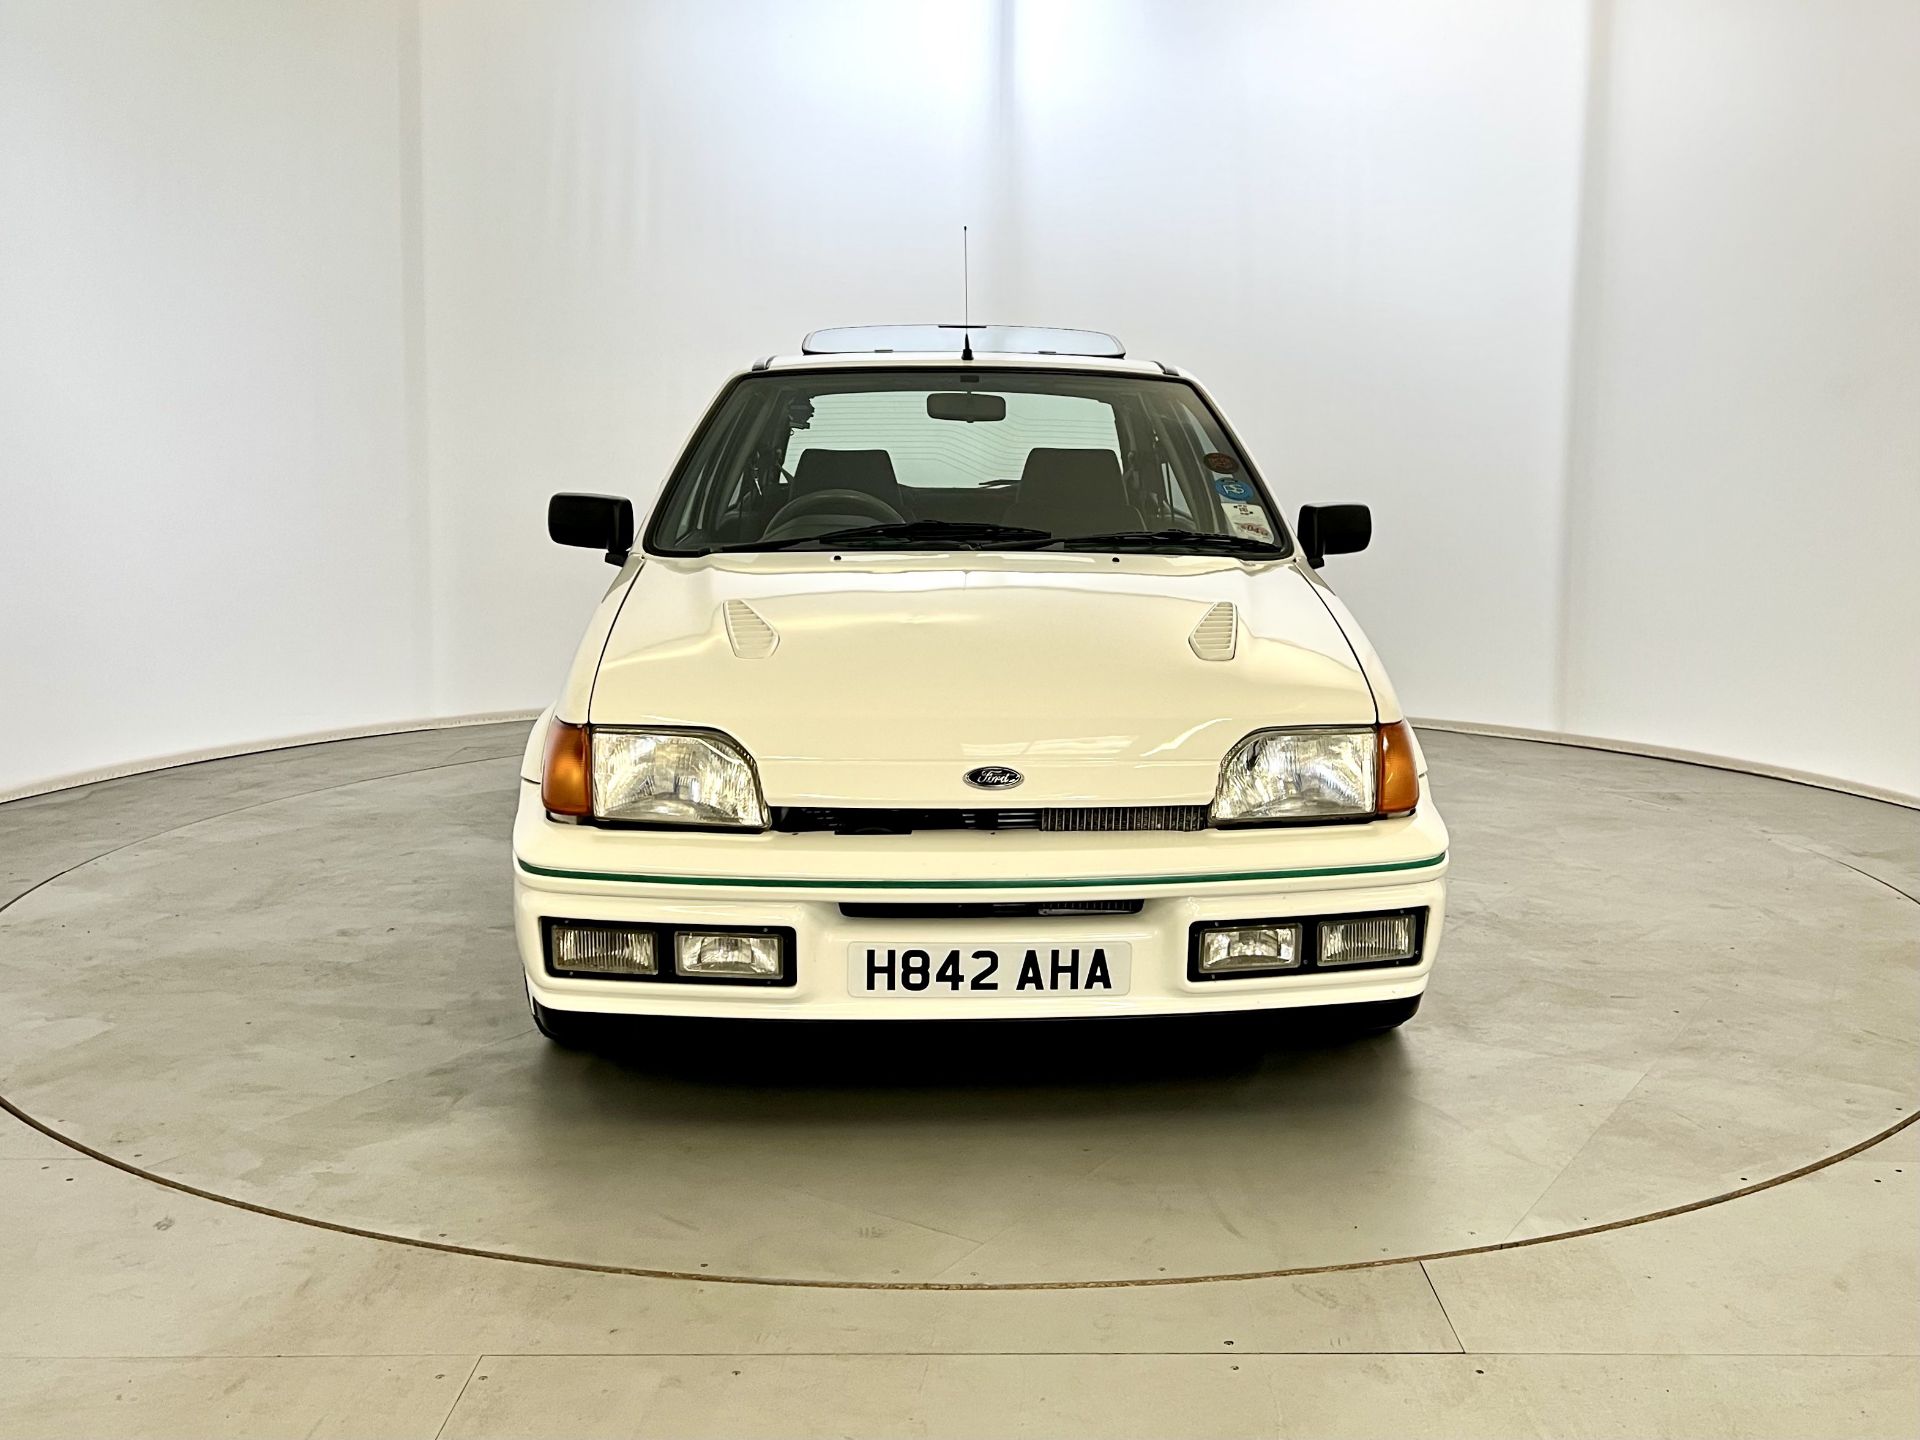 Ford Fiesta RS Turbo - Image 2 of 26